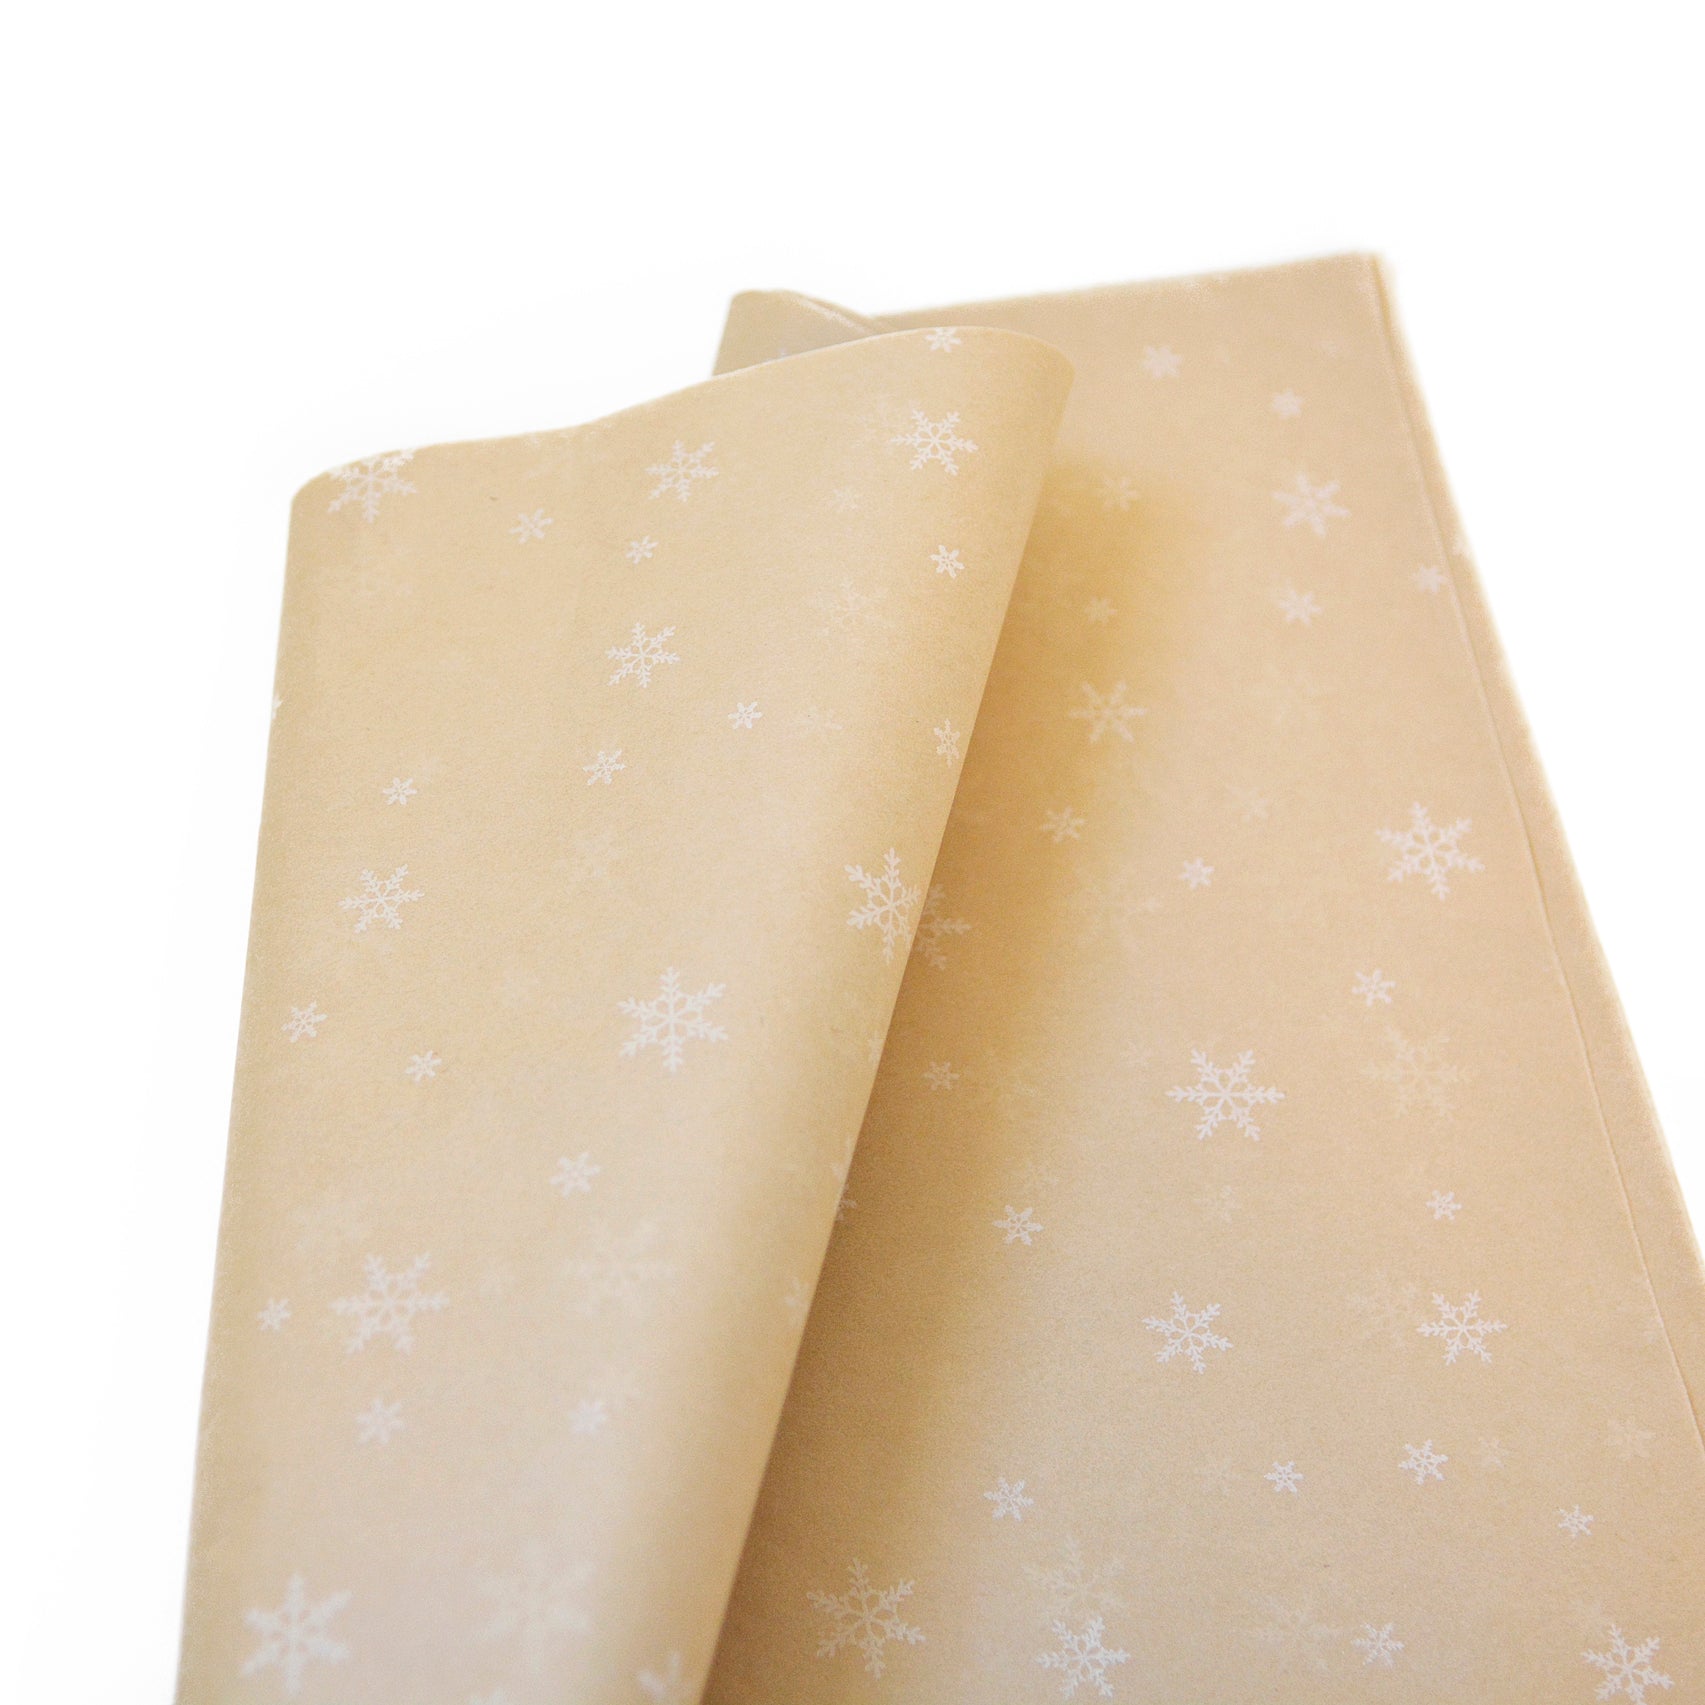 Kraft Snowflake Tissue Paper - Christmas Gift Wrapping & Winter